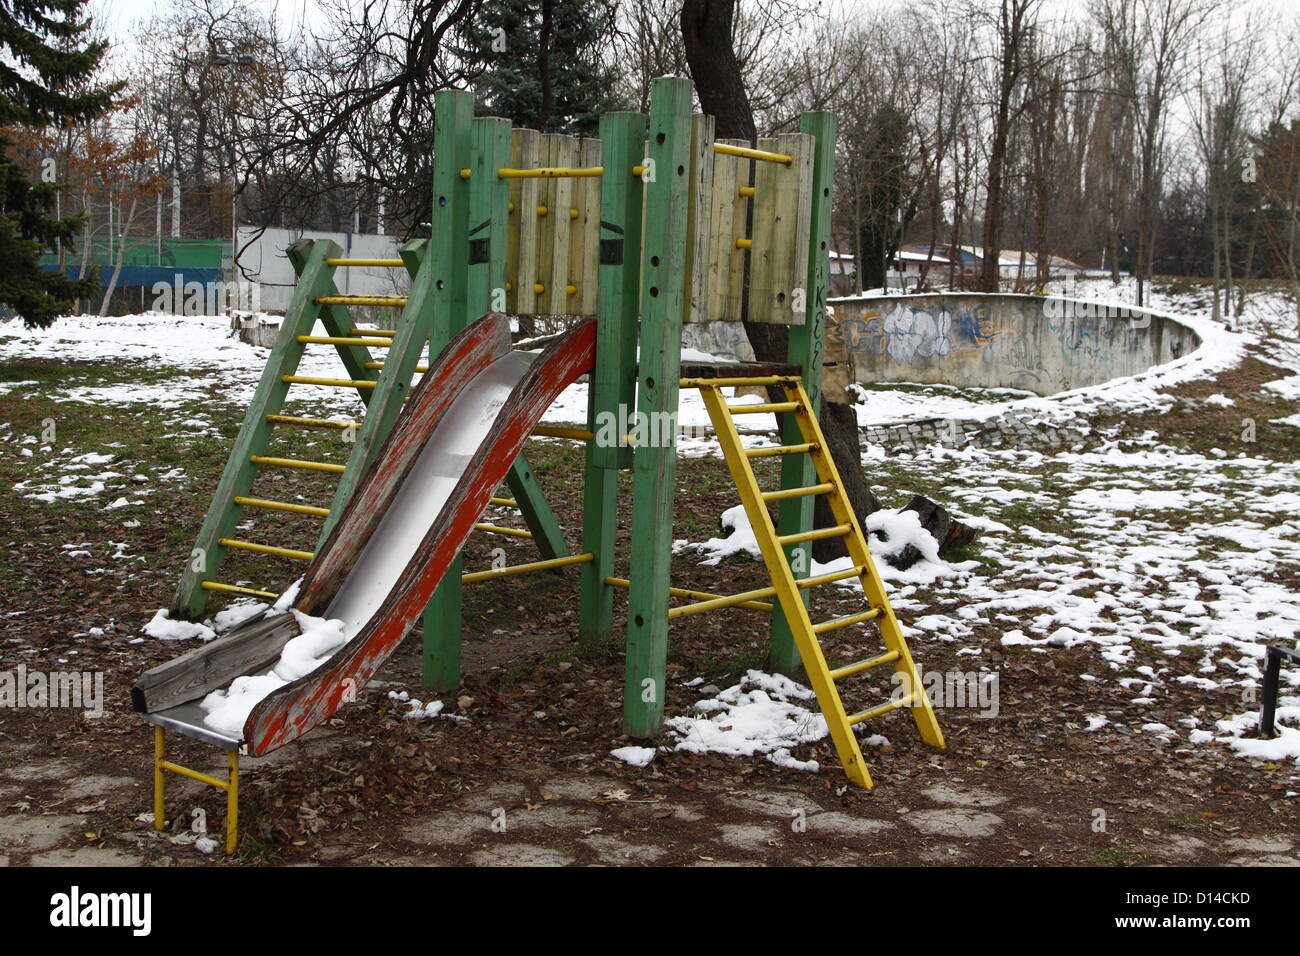 Sofia, Bulgaria. 6th December 2012. Children's slide in a park in Sofia. Playgrounds are plenty in the Bulgarian capital, but maintenance is either scarce or entirely absent, making it dangerous for the children to use some of the installations. Credit:  Johann Brandstatter / Alamy Live News Stock Photo